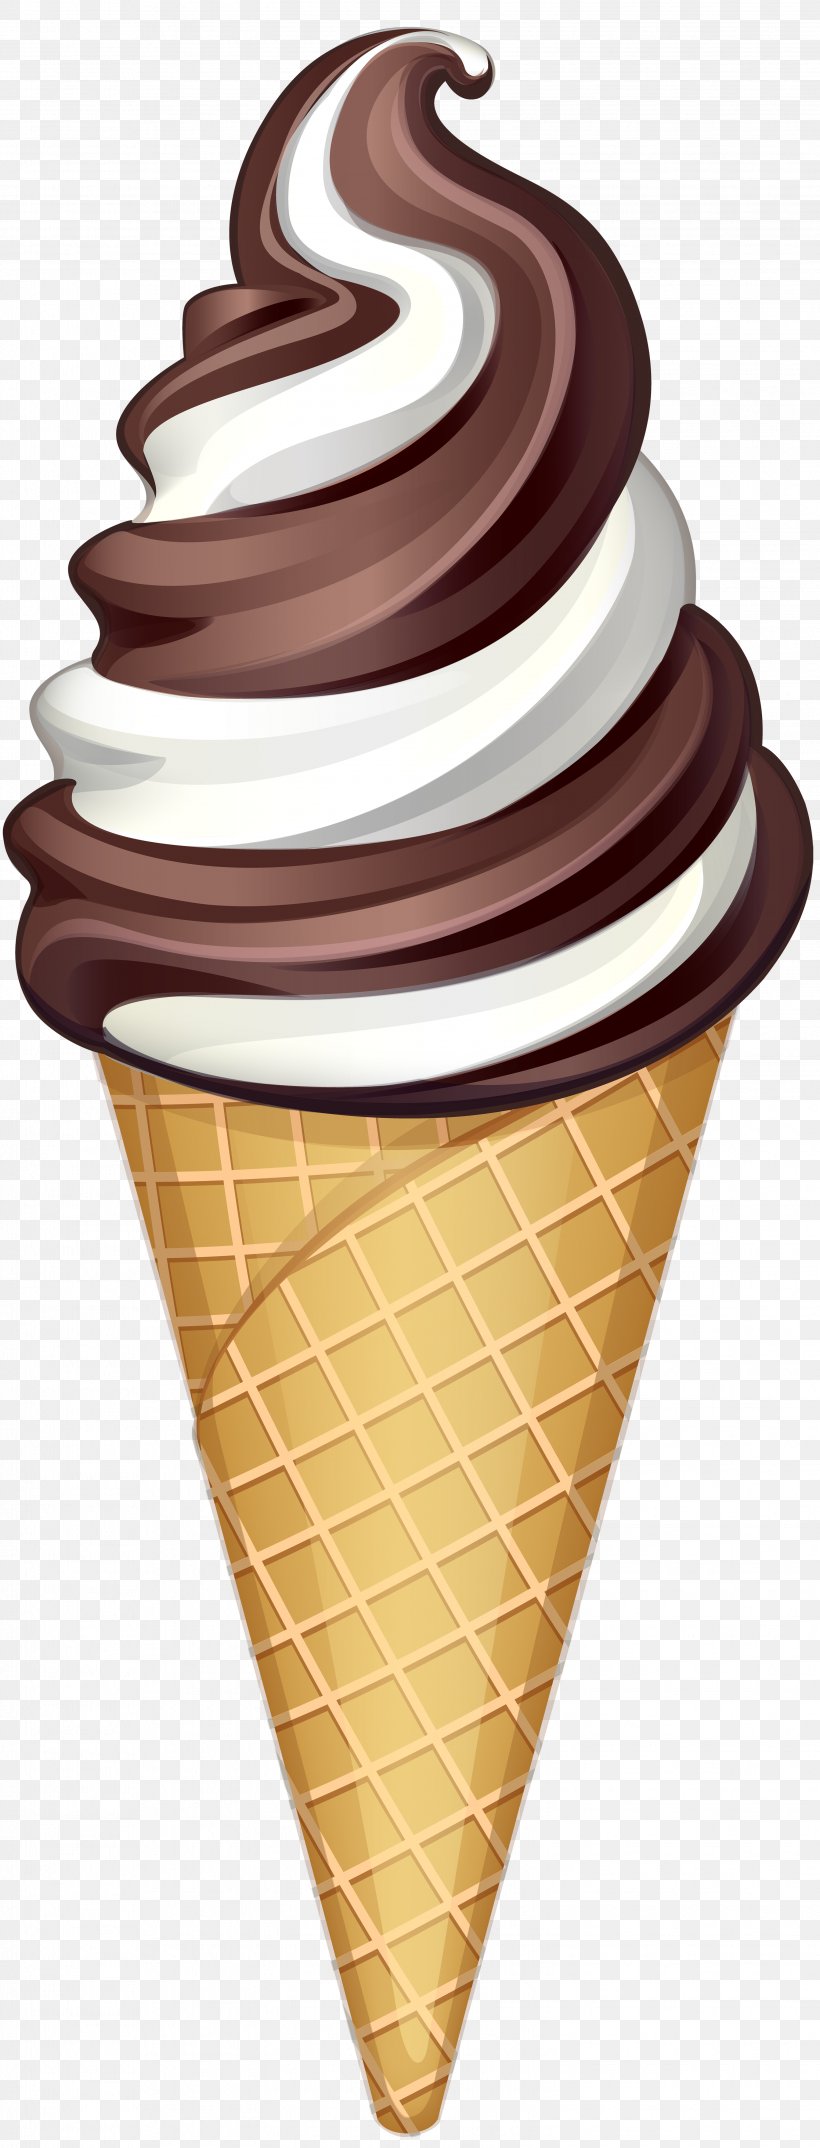 Image File Formats Lossless Compression, PNG, 3053x8000px, Ice Cream, Chocolate Ice Cream, Cream, Dairy Product, Dairy Products Download Free